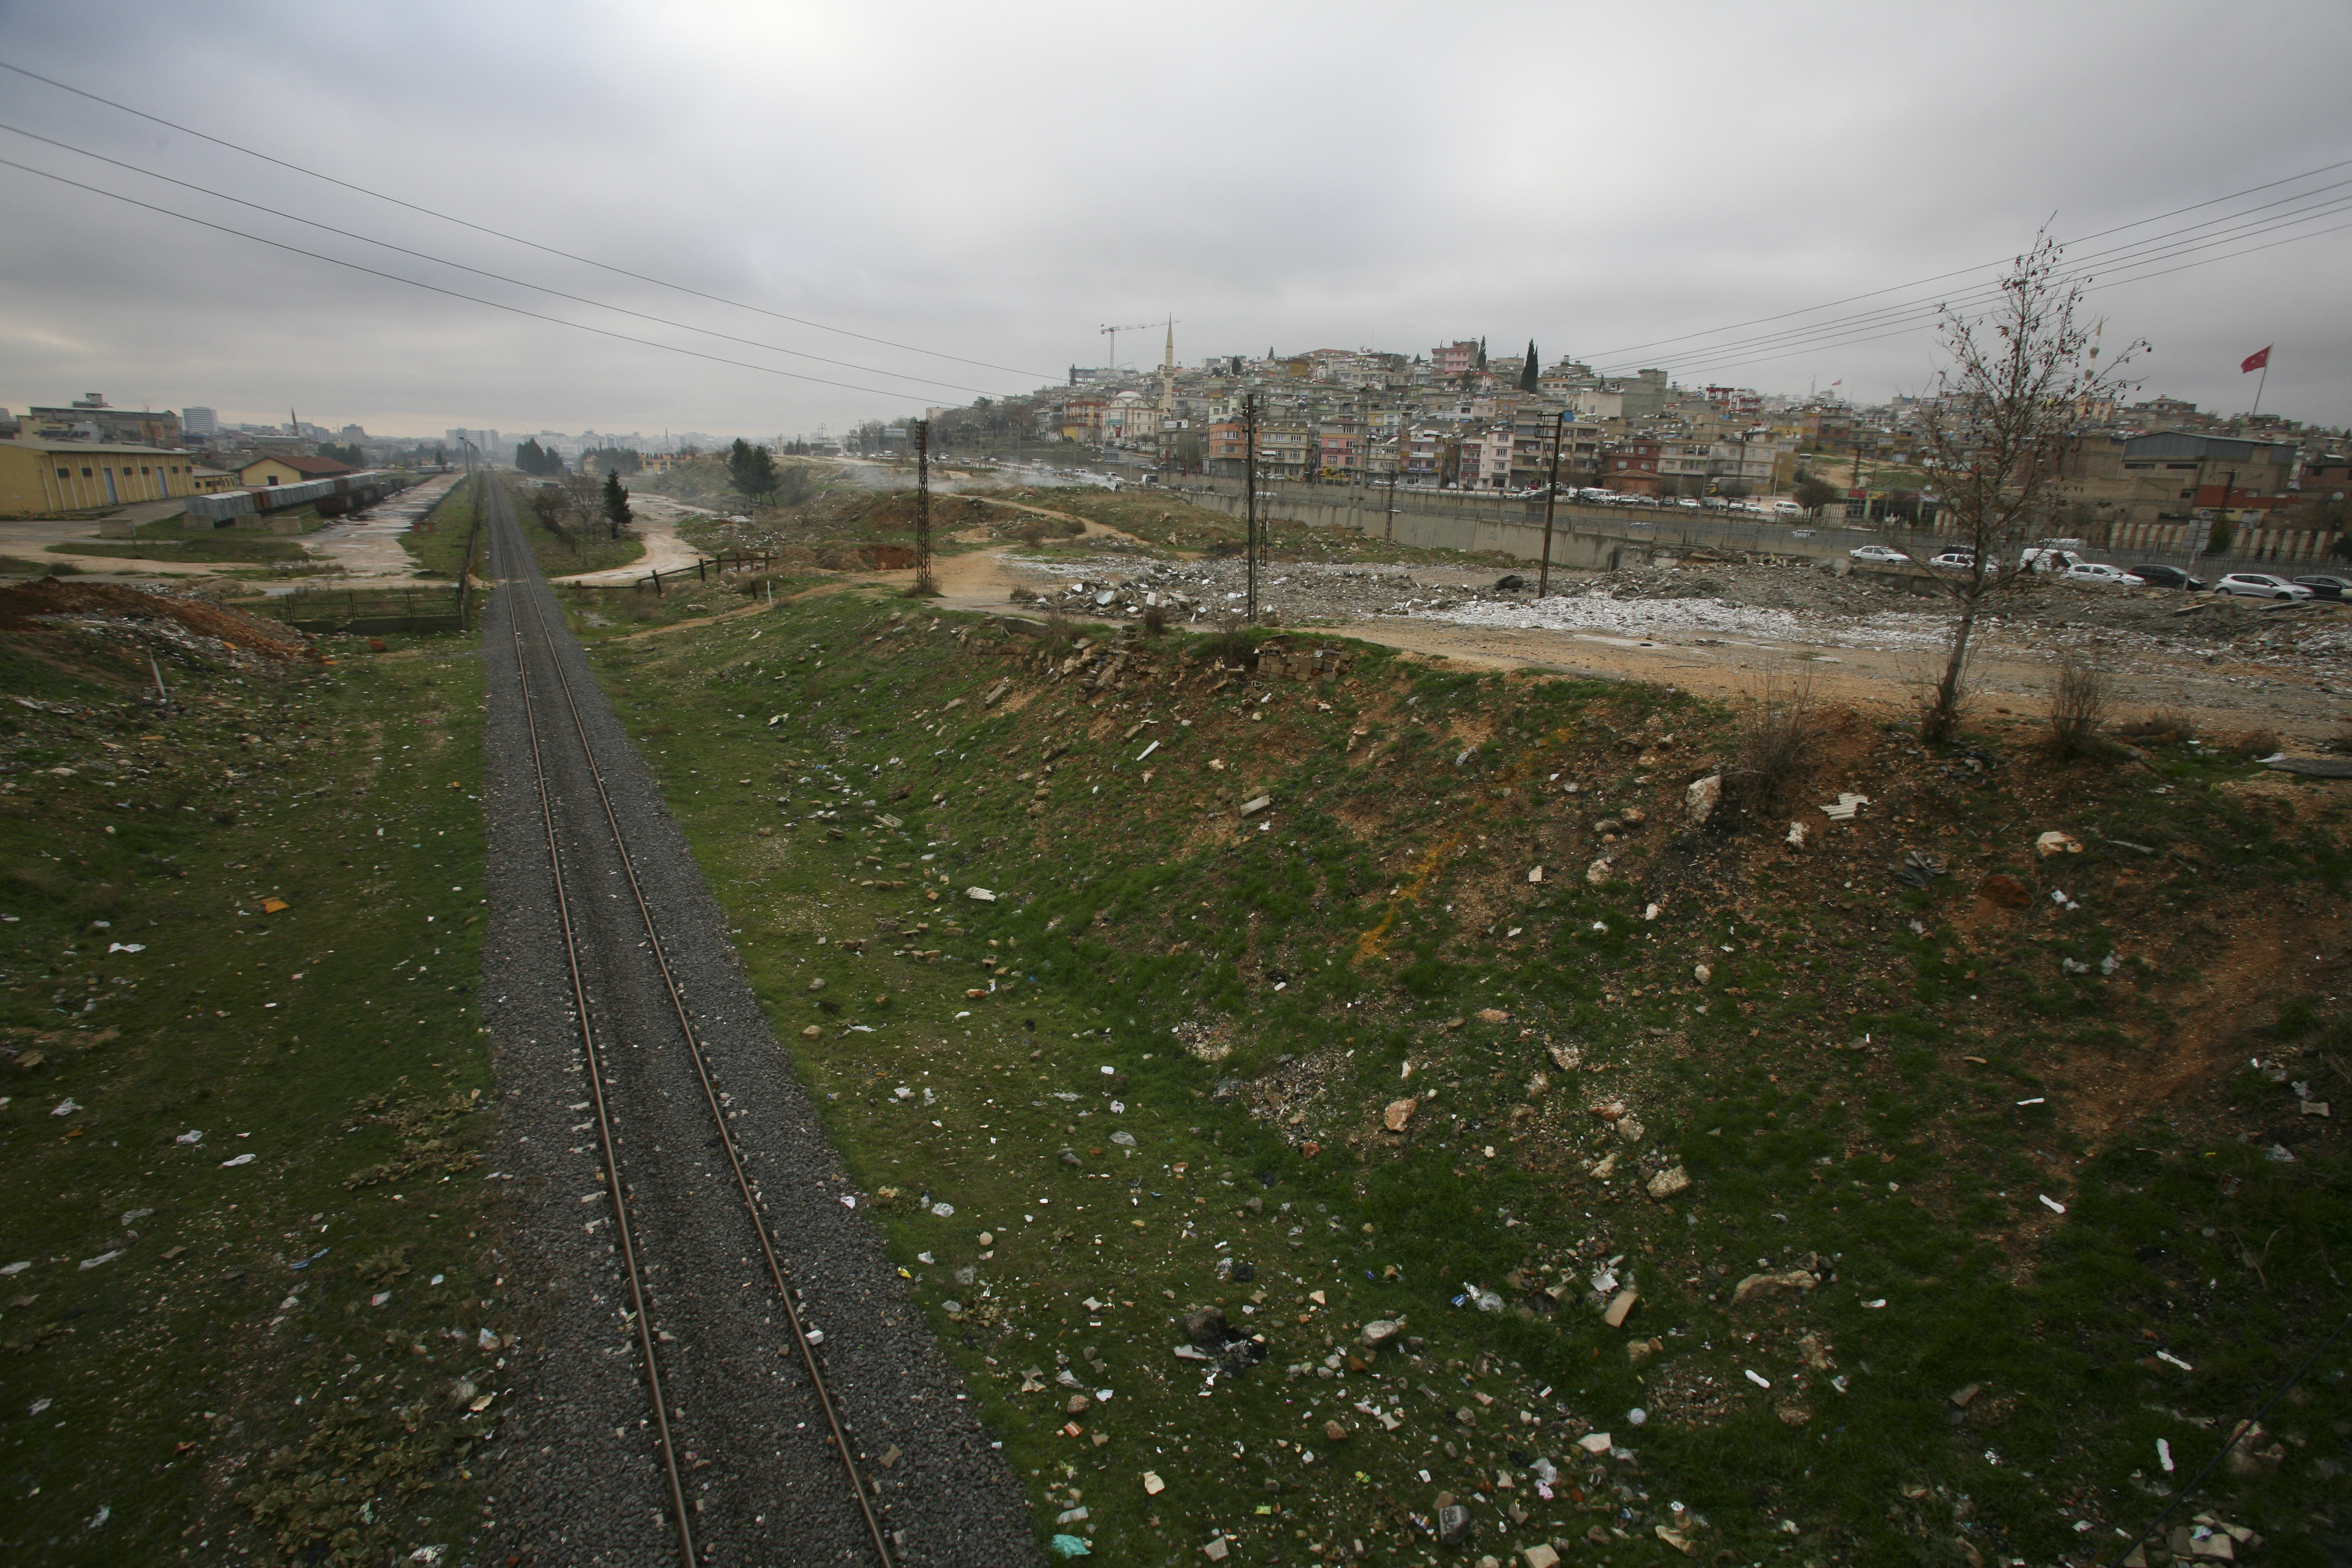 A rail line outside of Gaziantep, 2014. Photo by author.